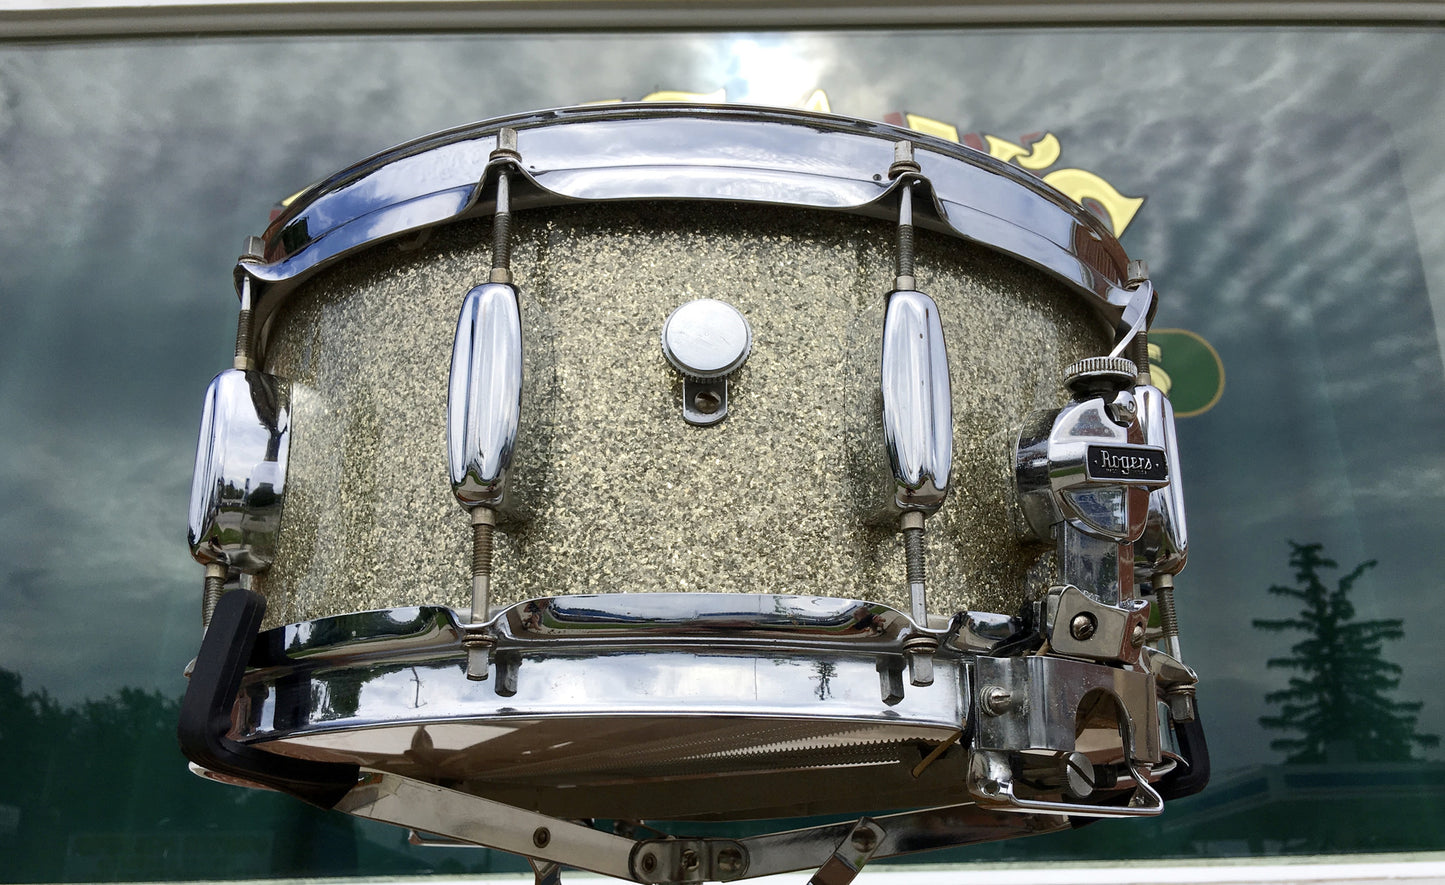 1963 Rogers 6.5x14 Wood Dynasonic Snare Drum in Silver Sparkle